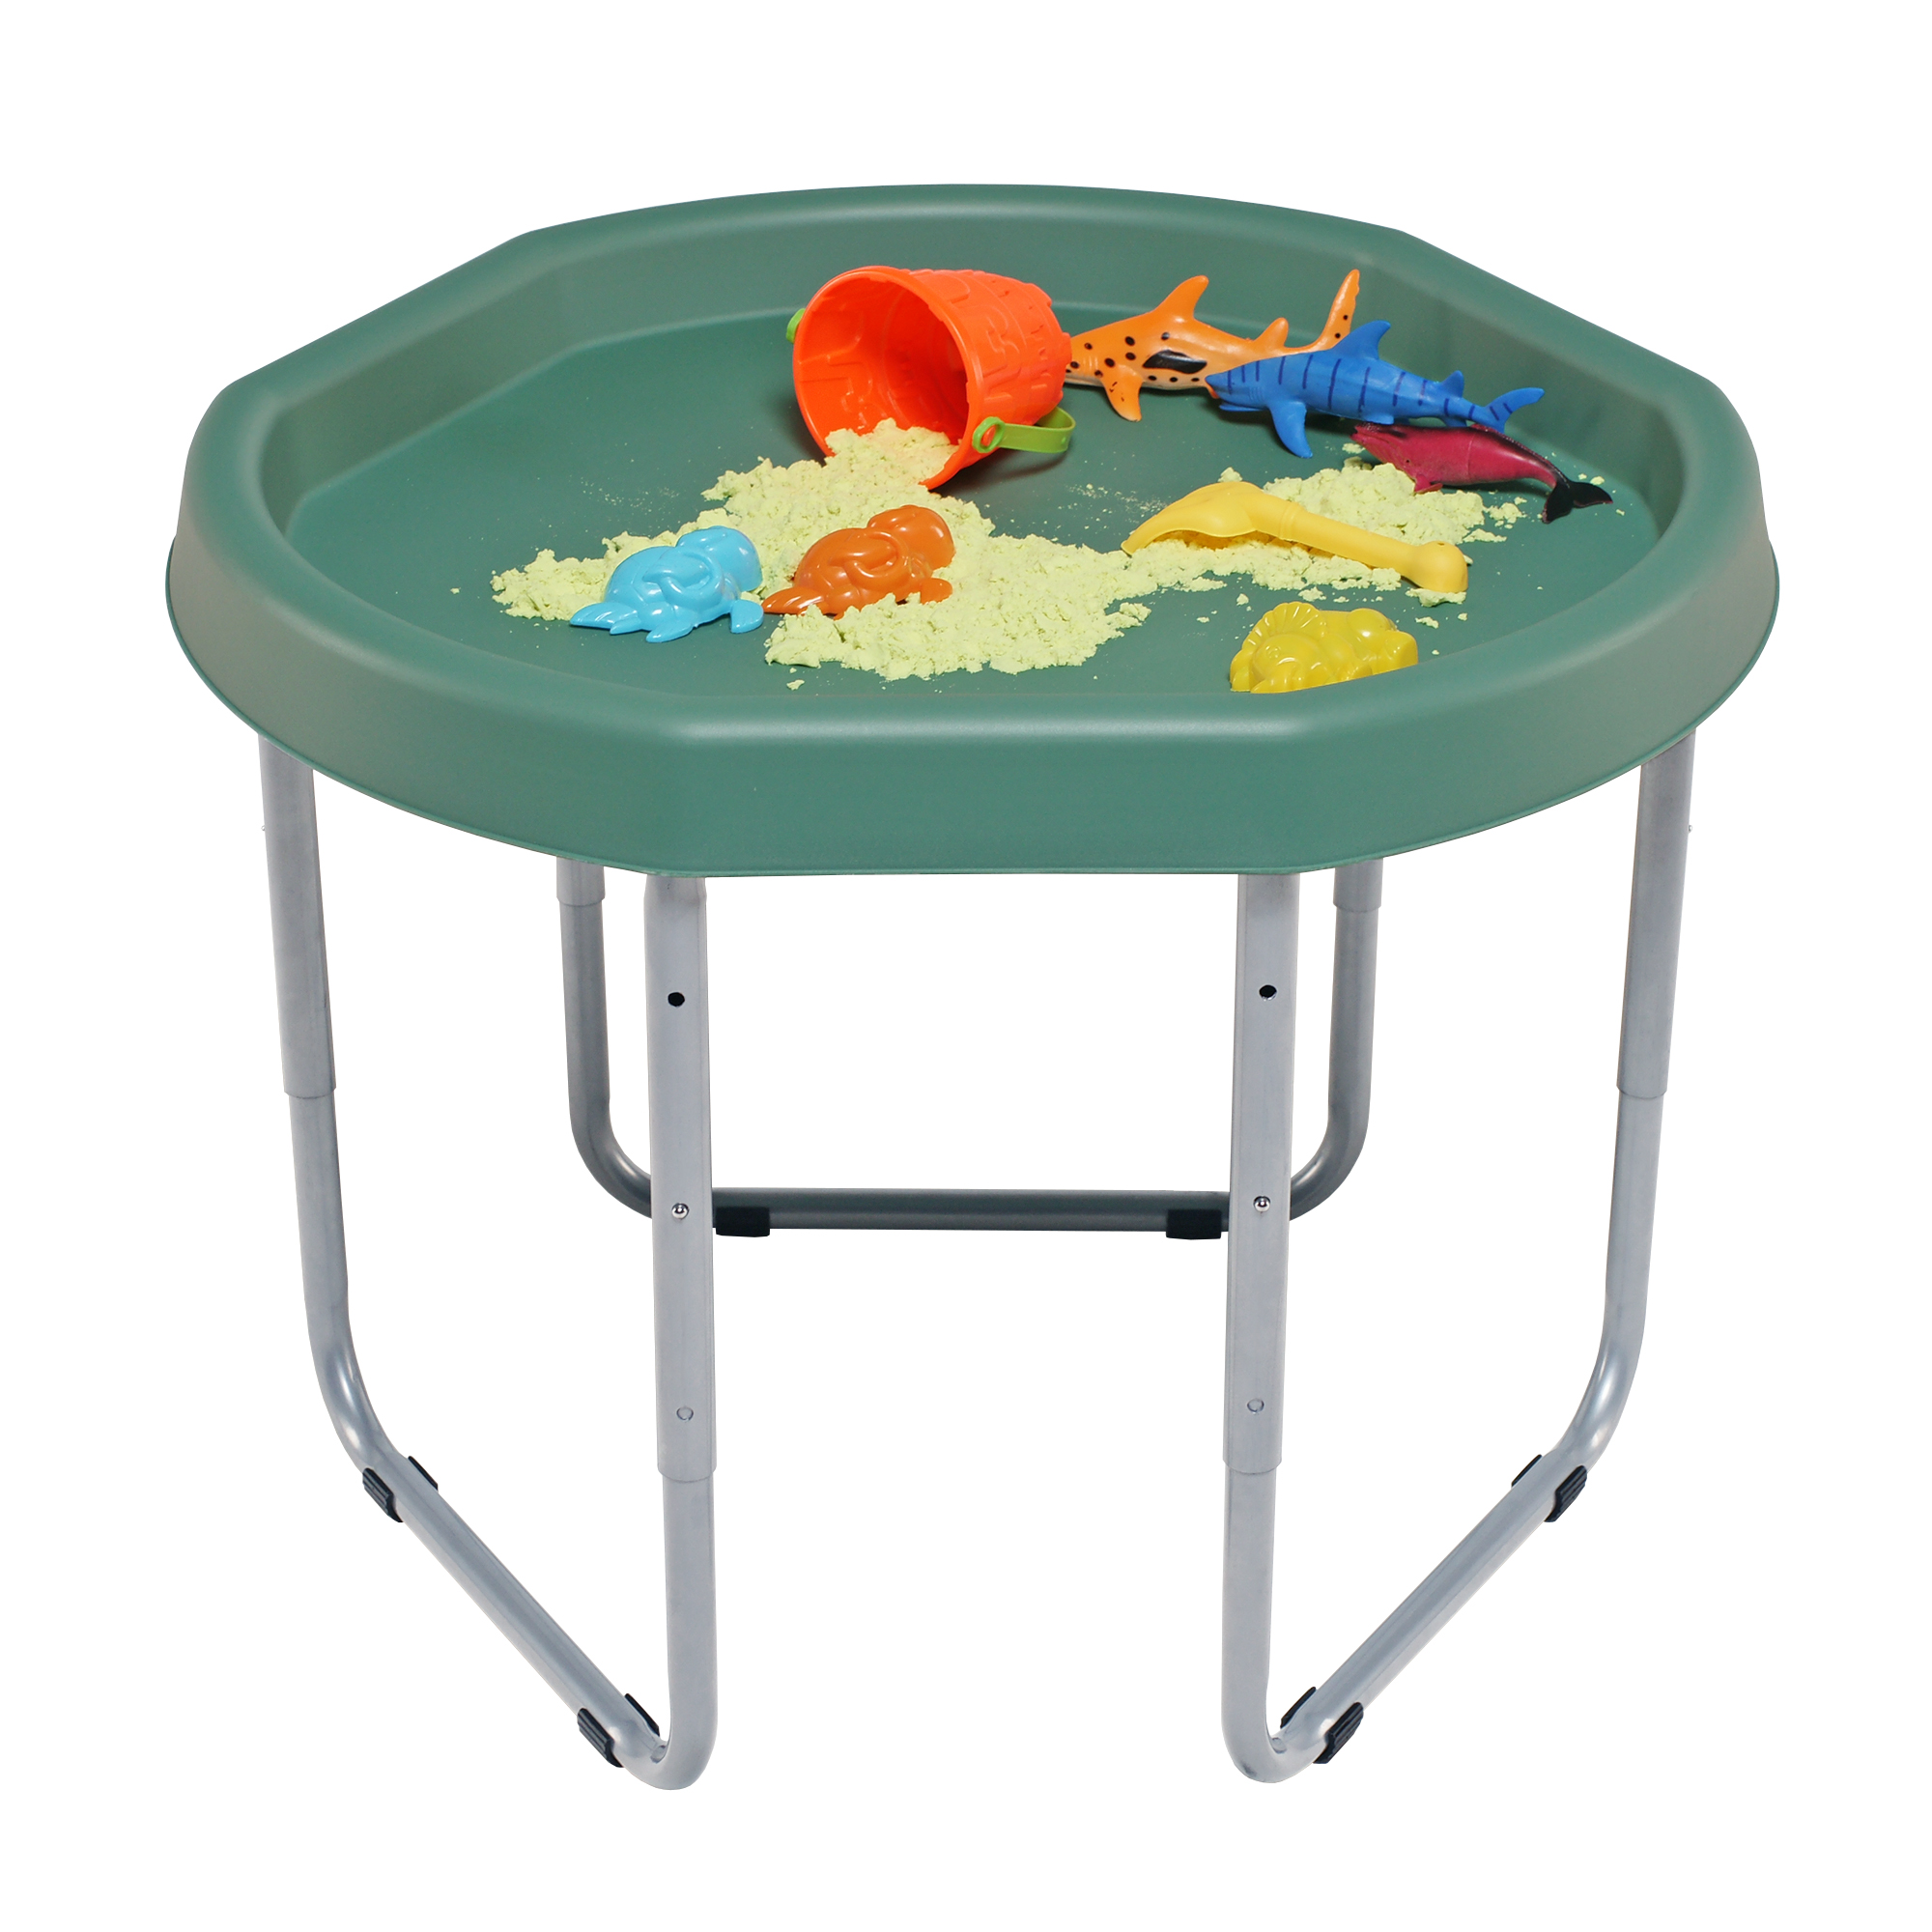 Tuff Tray Hexacle Stand - Jungle Green